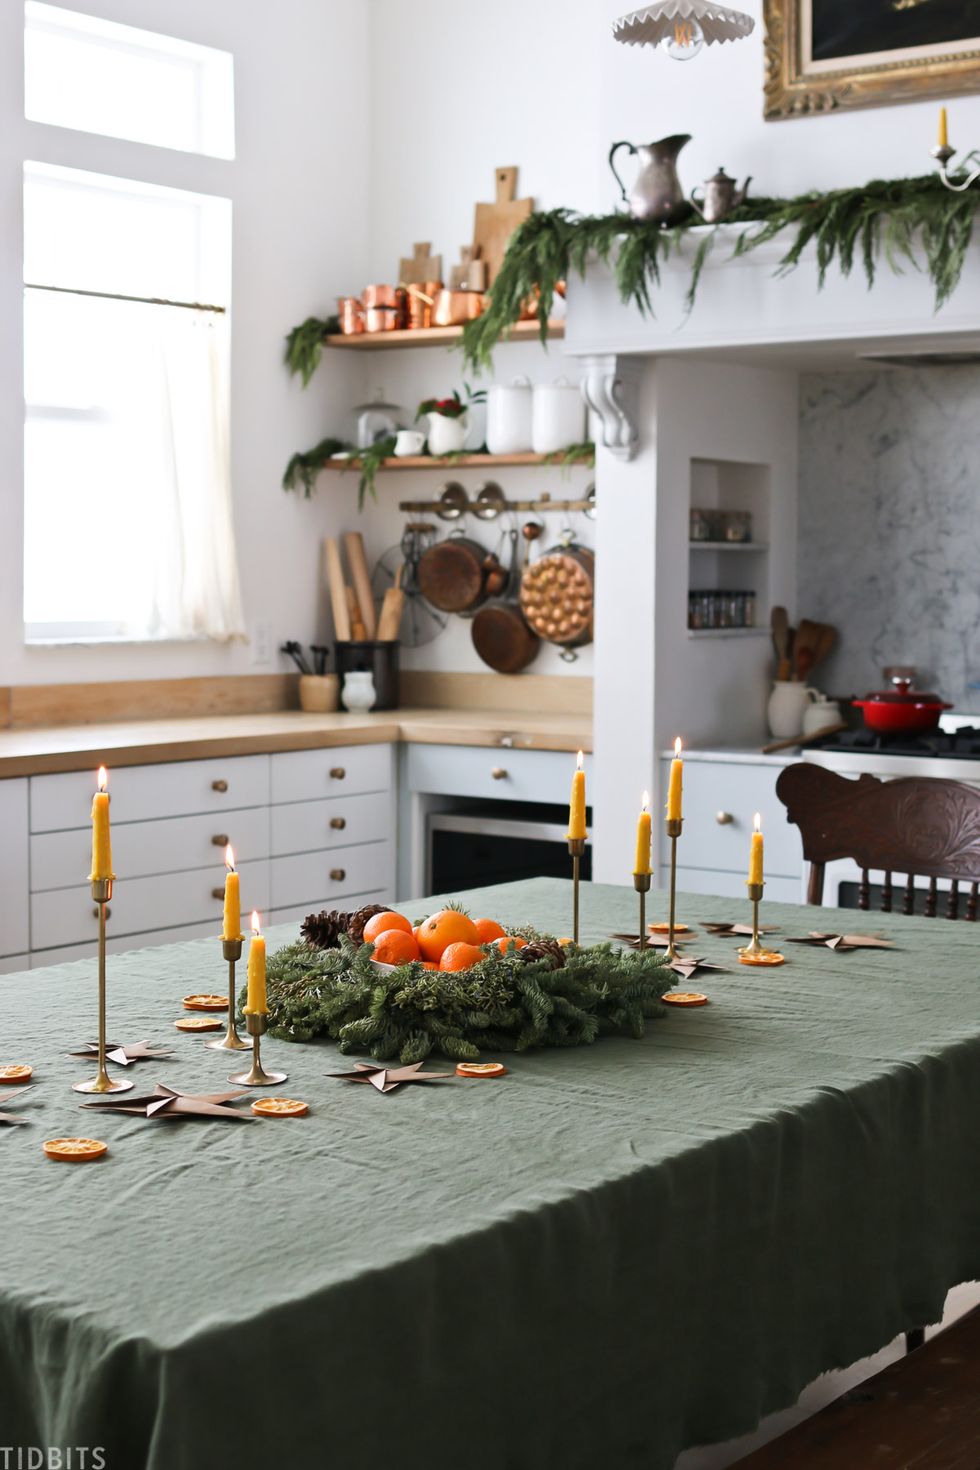 green table clothes and handmade candles